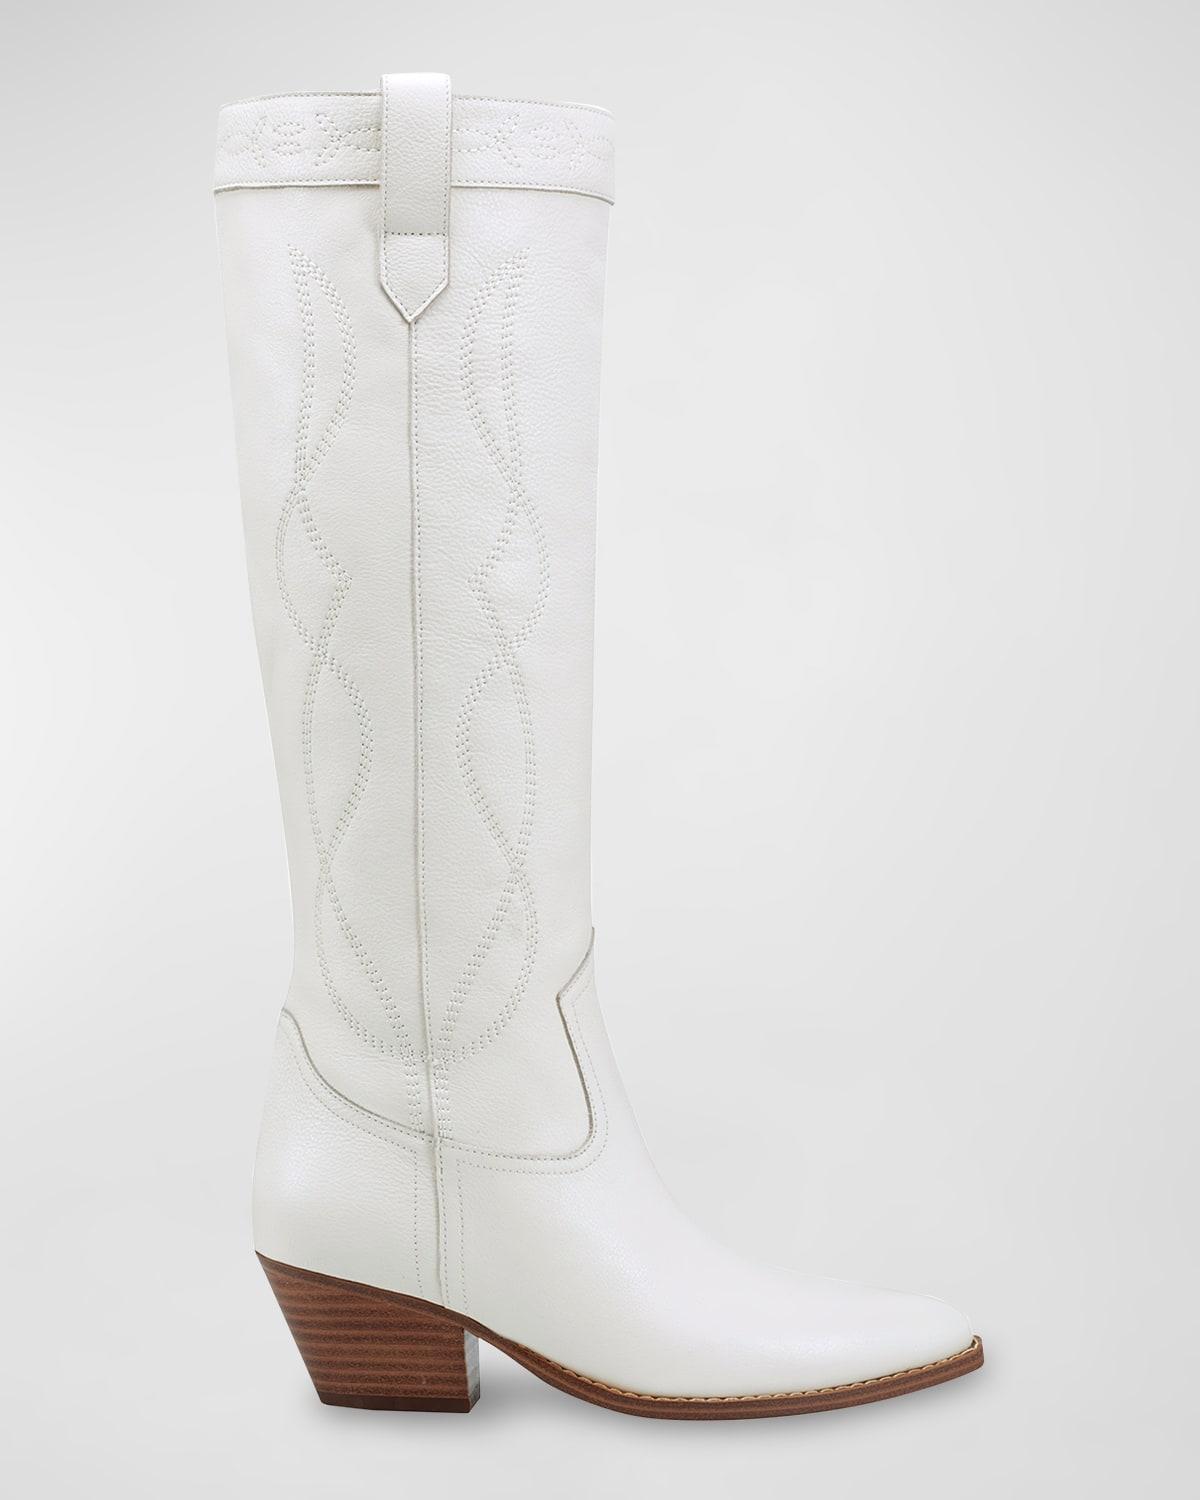 Marc Fisher LTD Edania Pointed Toe Knee High Boot Product Image